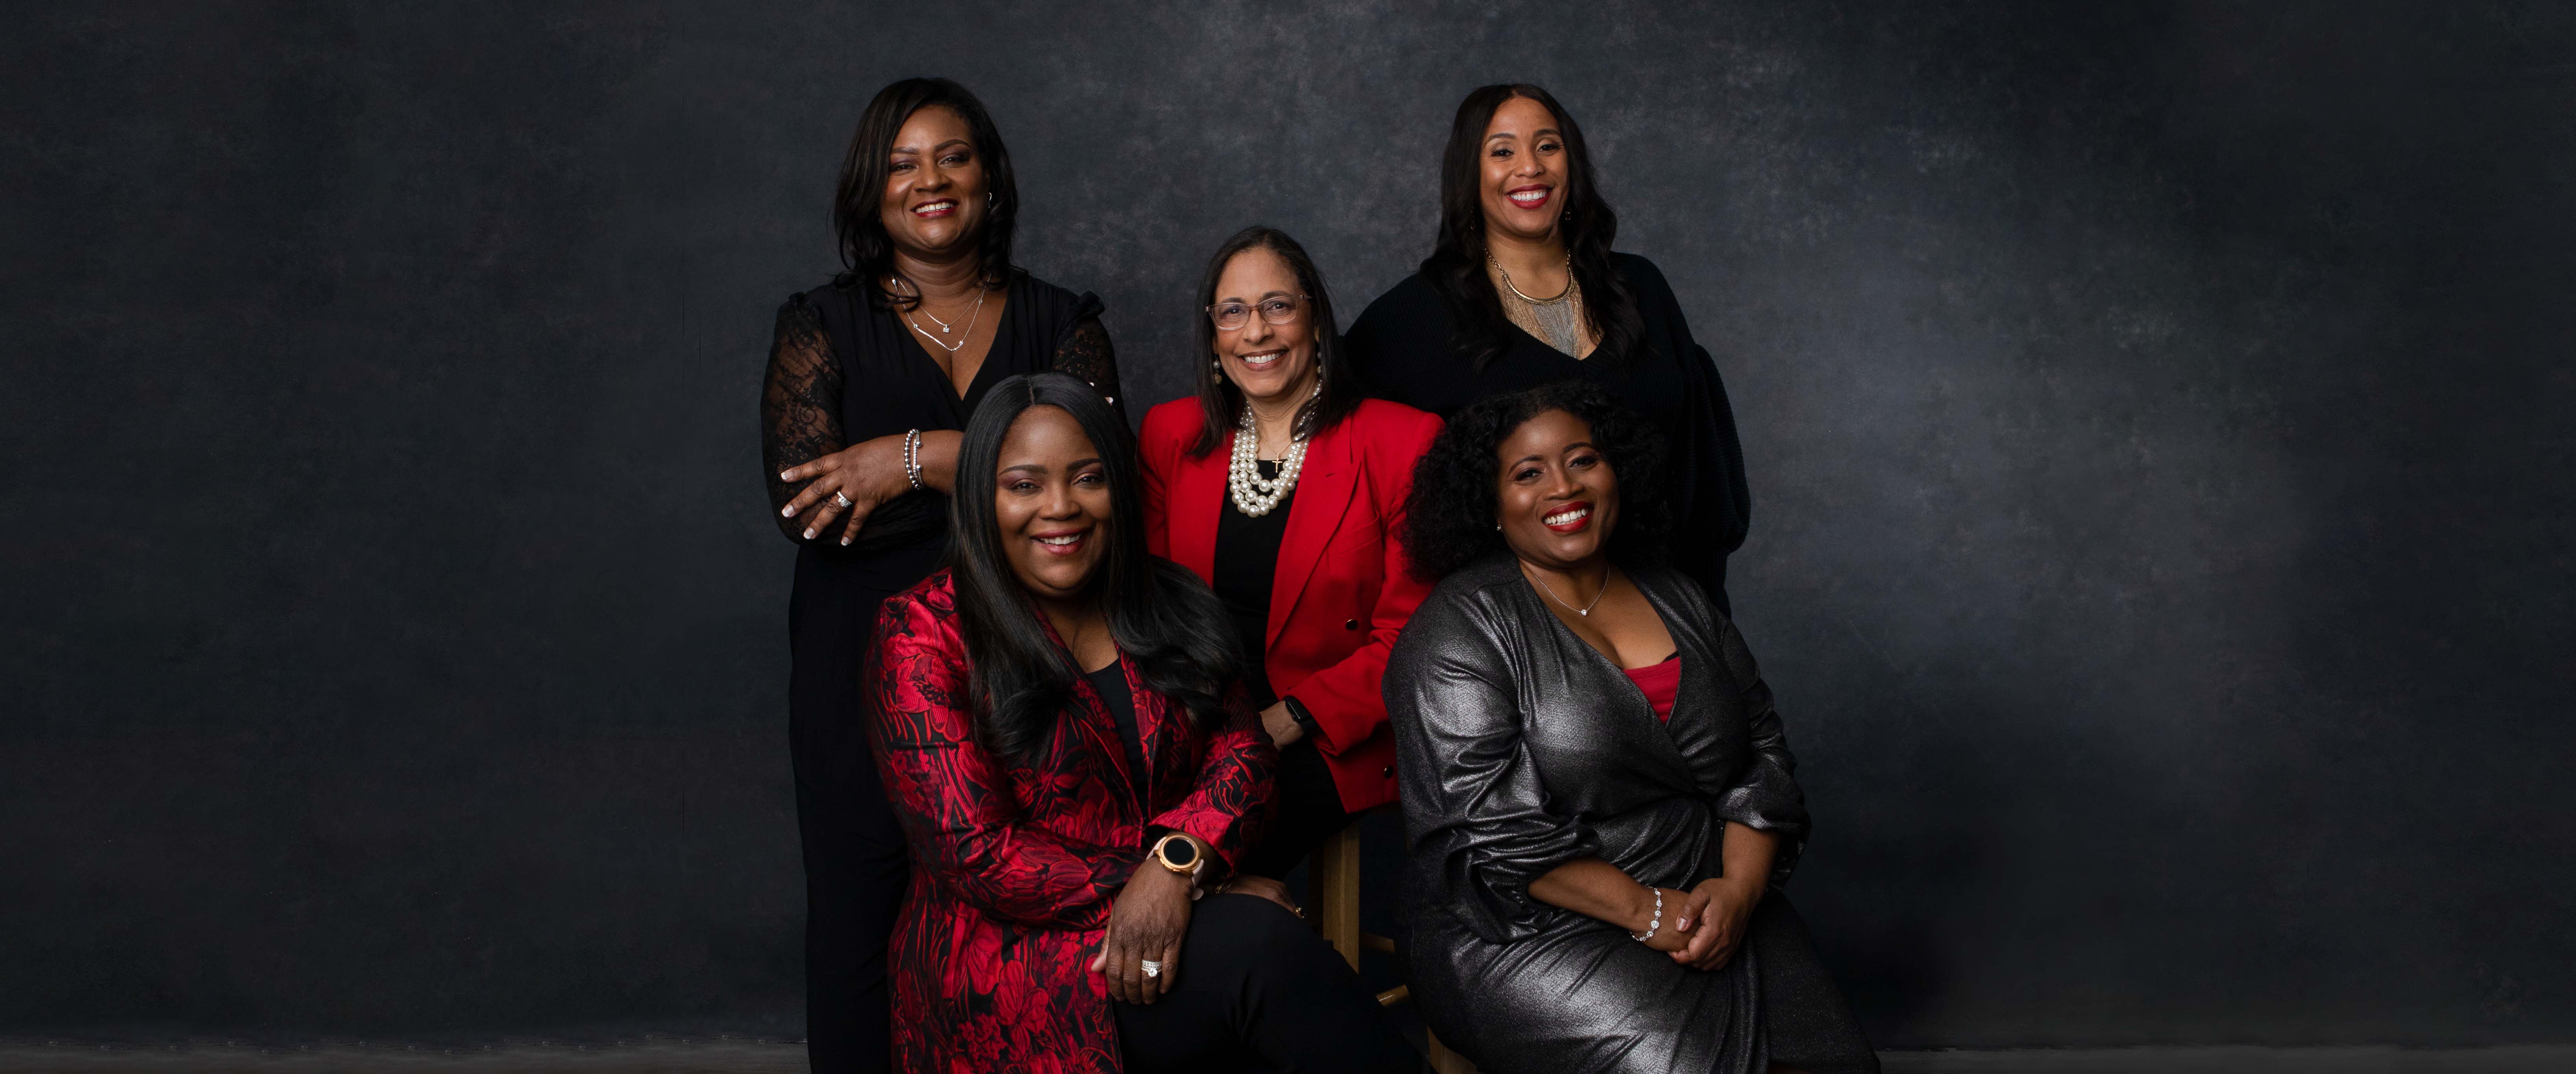 Women Leaders of Color at Ohio State 